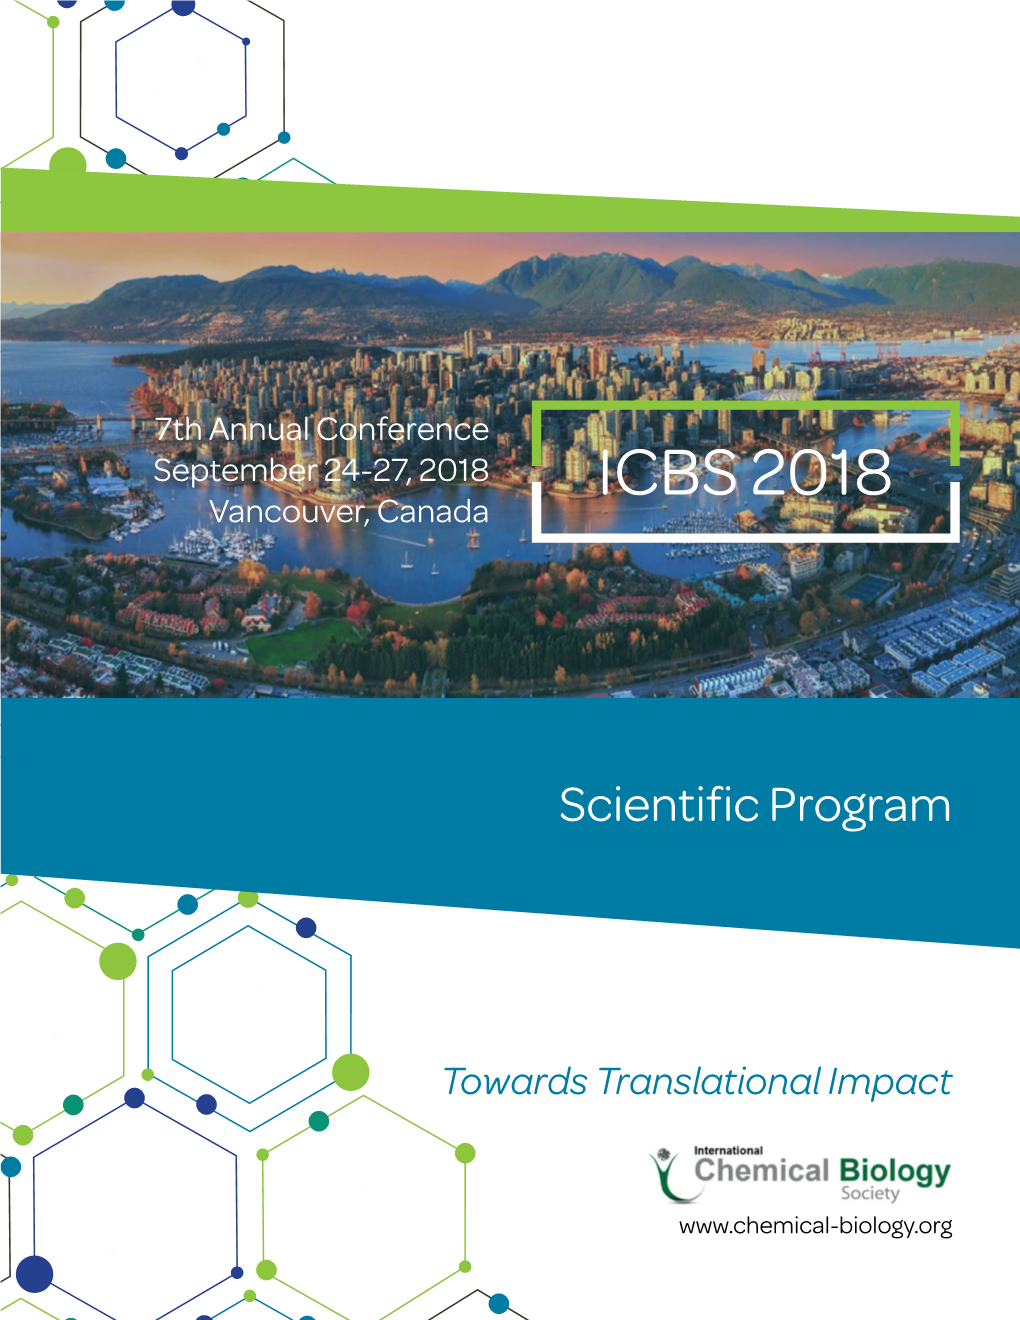 ICBS 2018 Vancouver, Canada